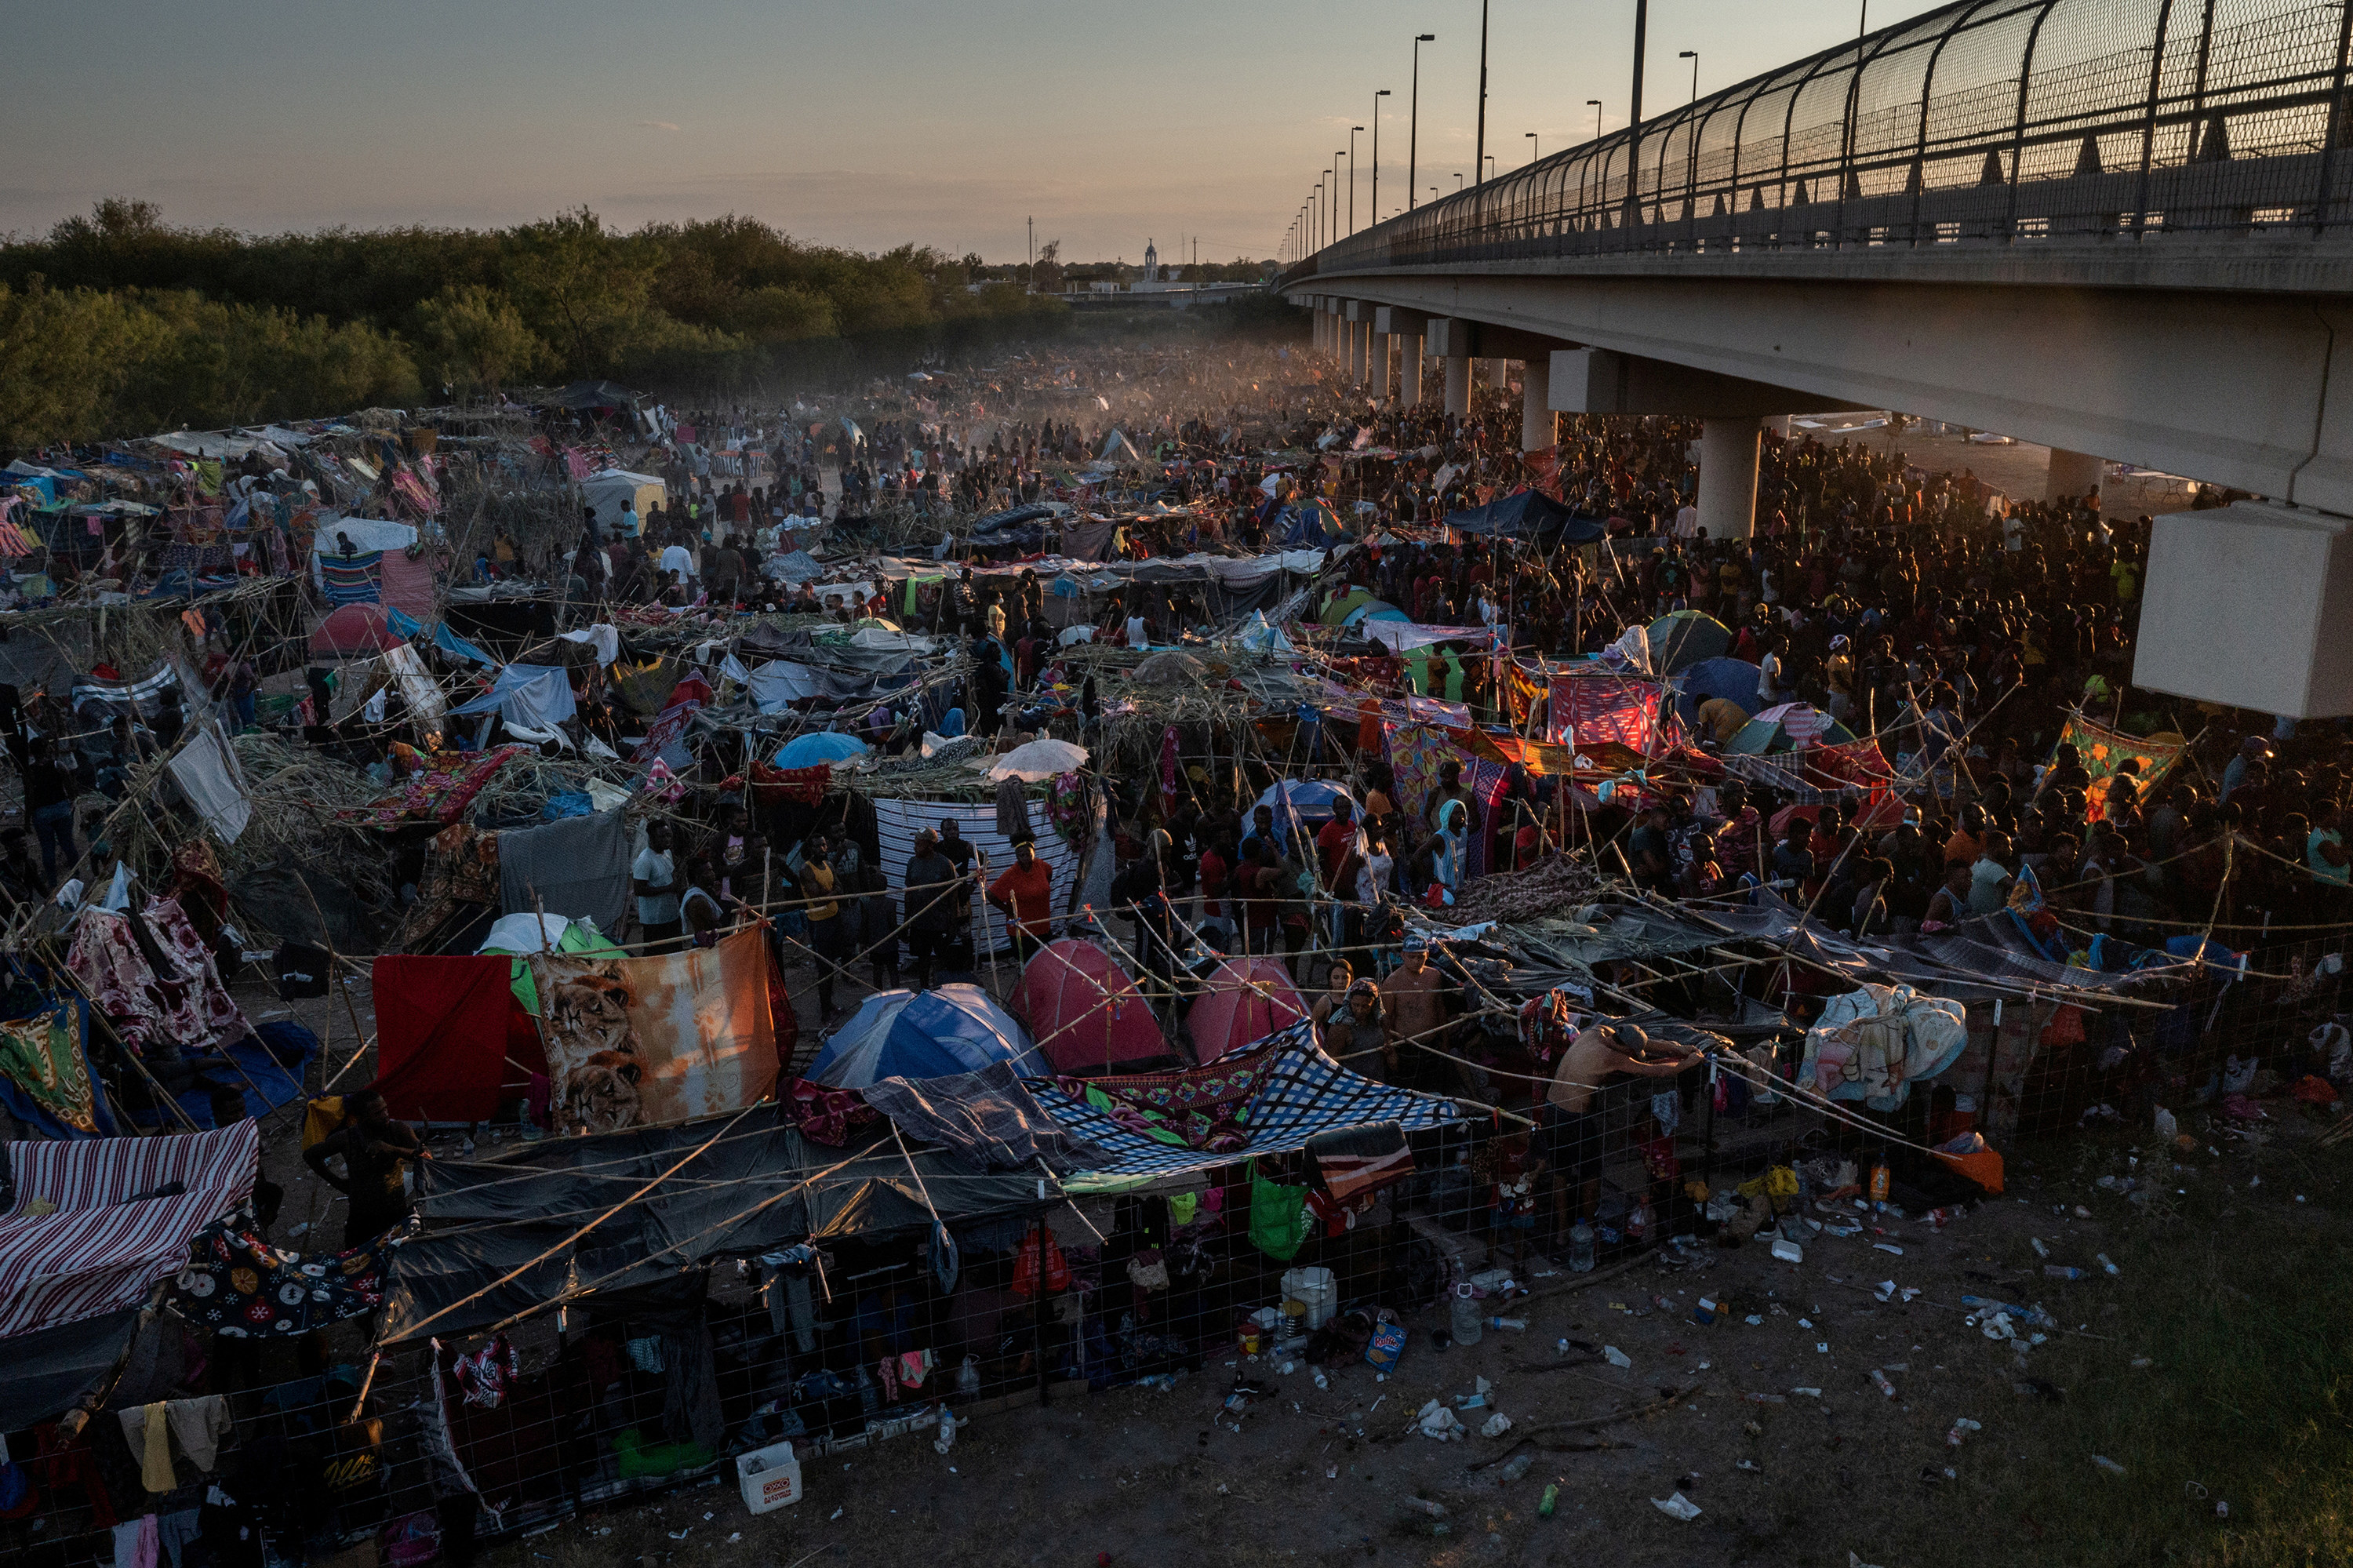 People seen living under makeshift structures made of blankets and sticks under a bridge